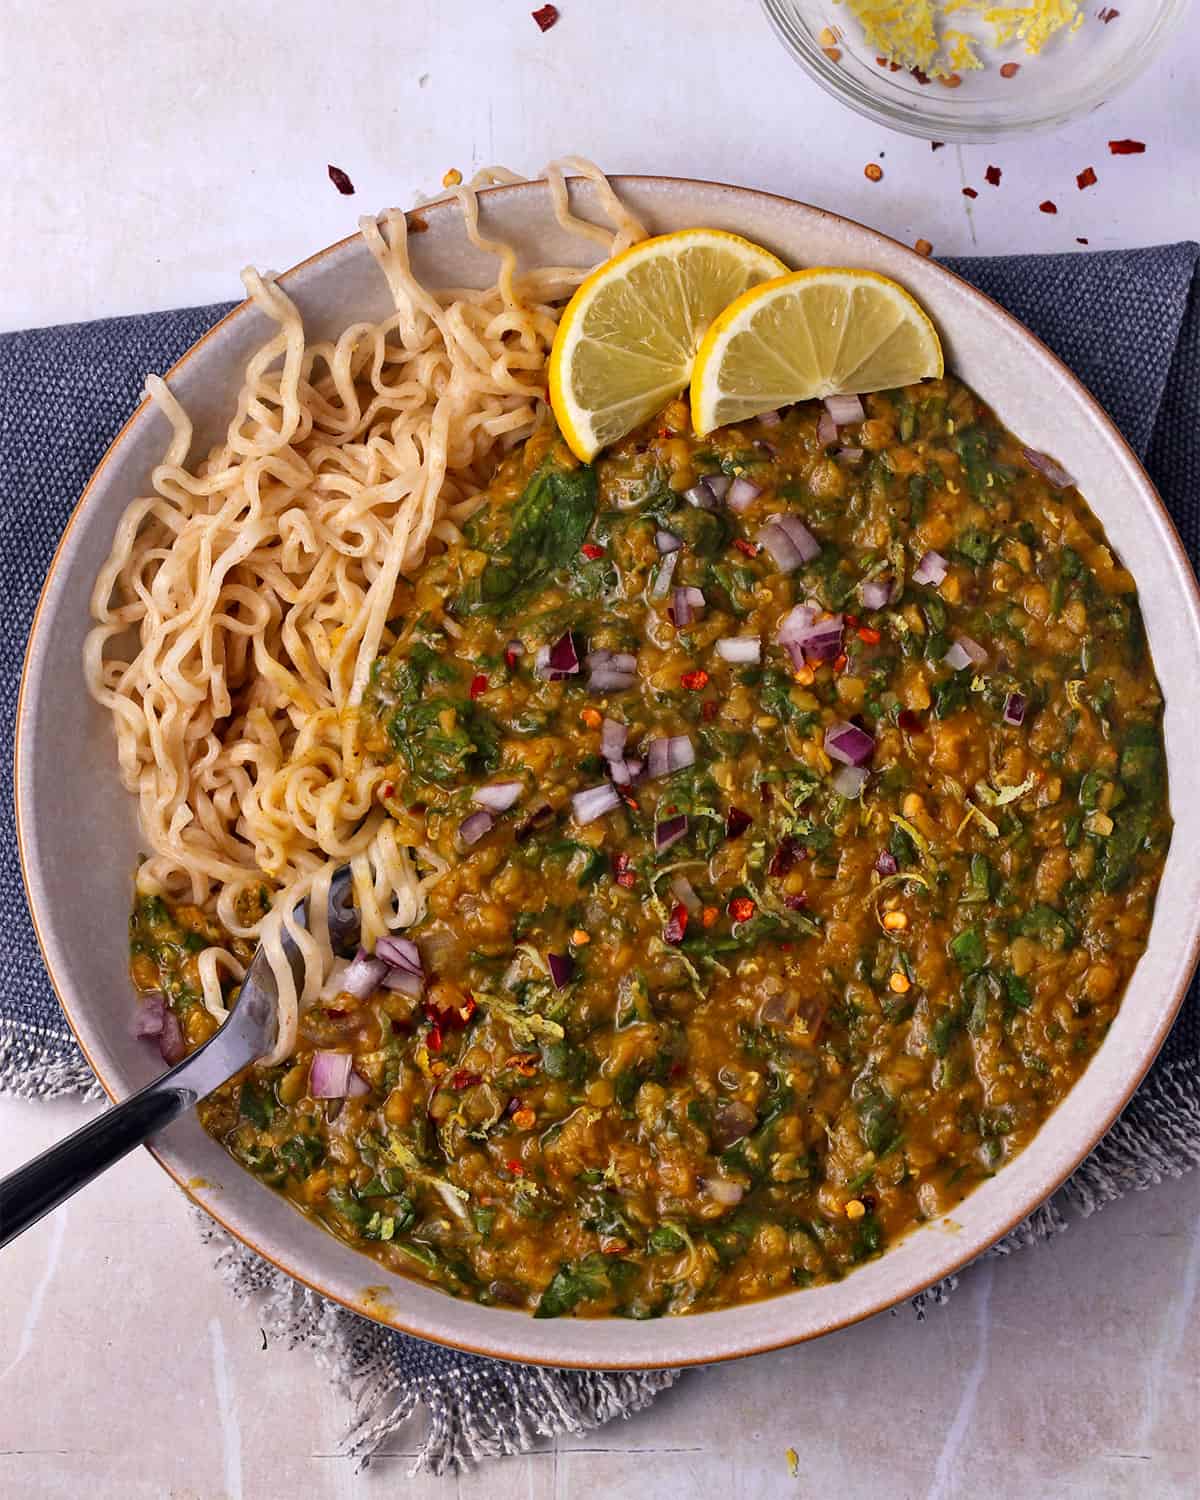 Curry with spinach and lentils in a bowl with noodles and a fork.